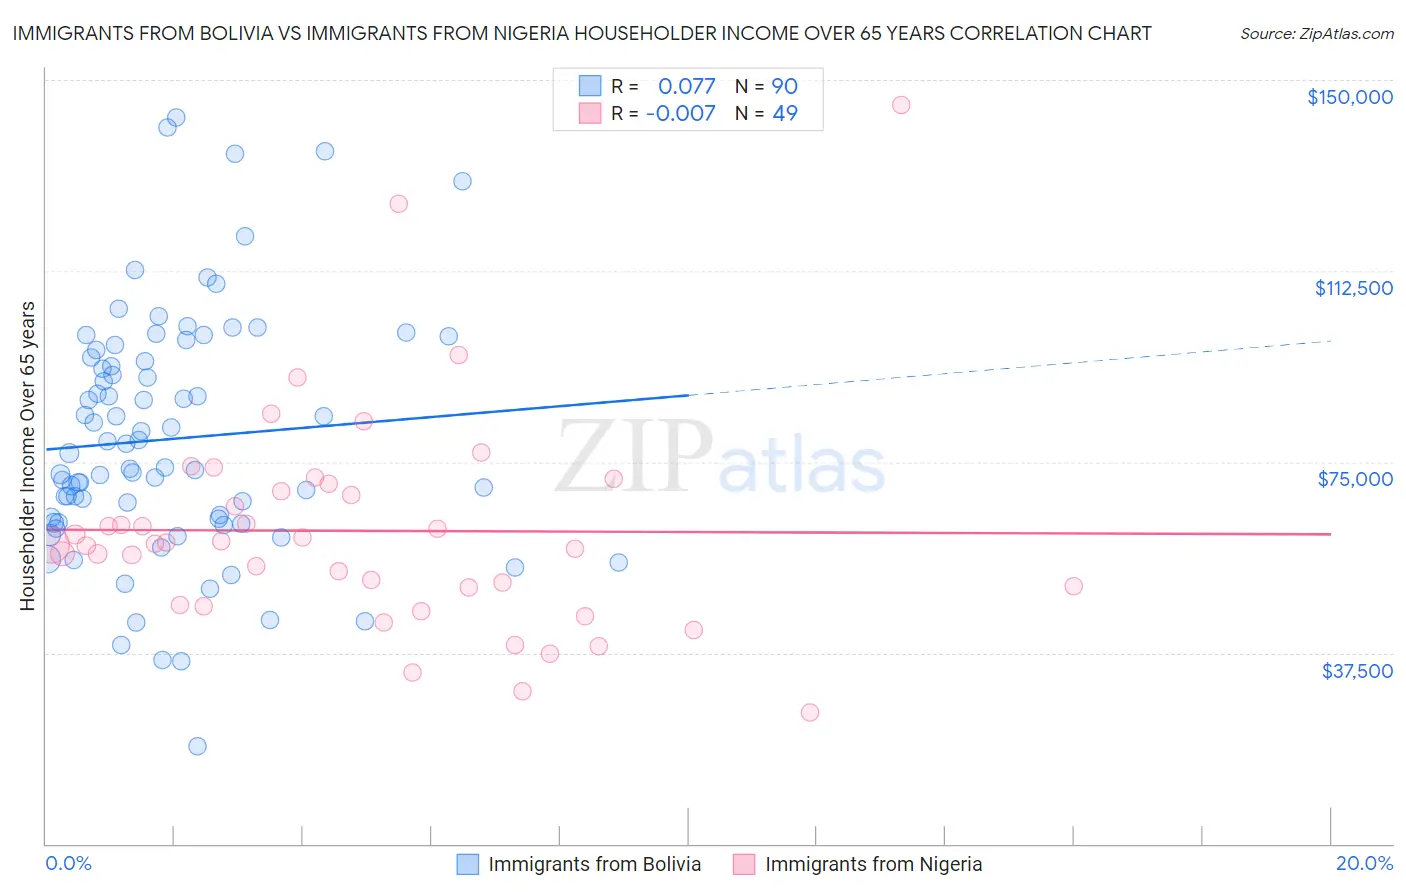 Immigrants from Bolivia vs Immigrants from Nigeria Householder Income Over 65 years